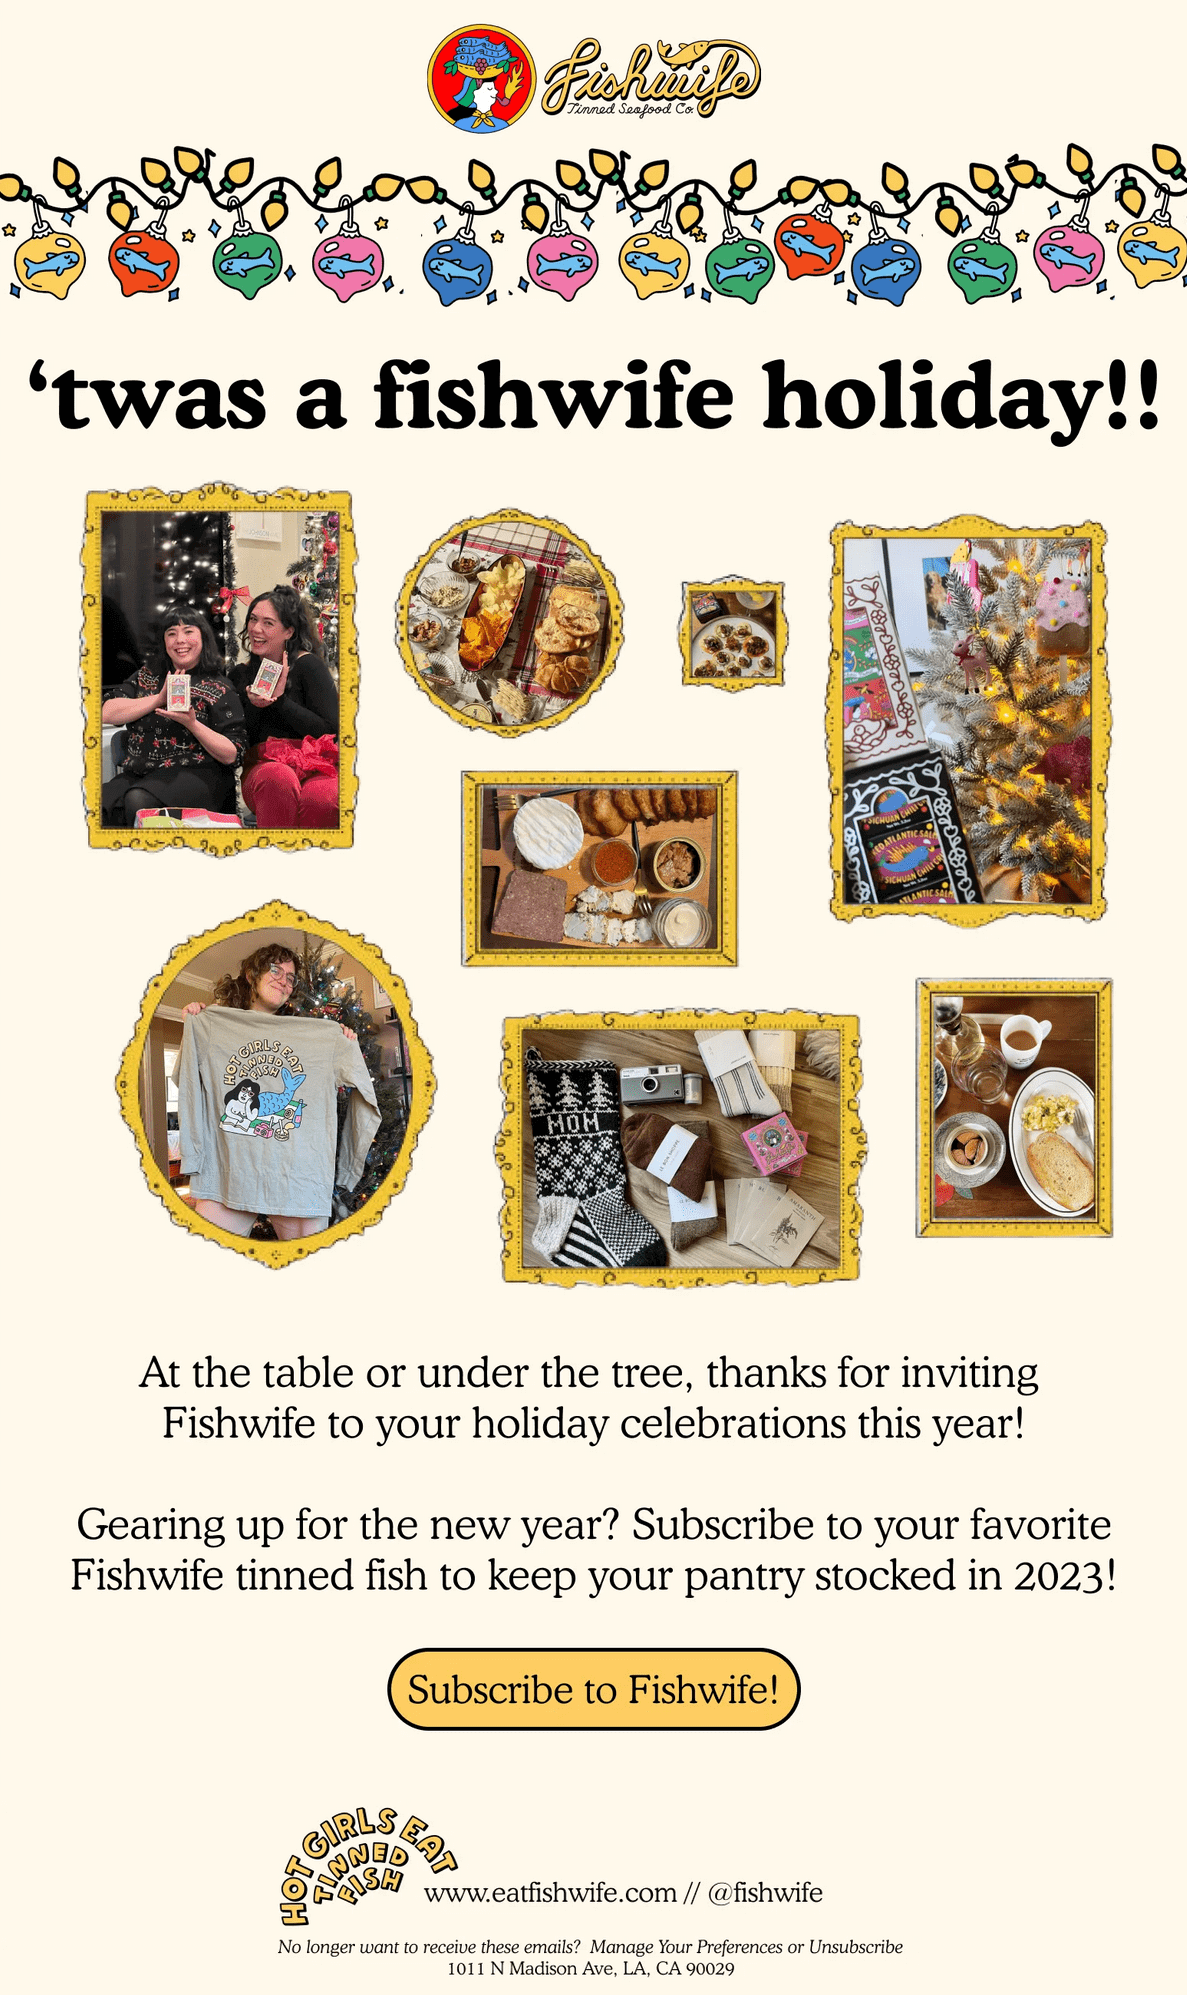 A Fishwife email thanking the brand’s customers for making the products part of their holiday celebrations